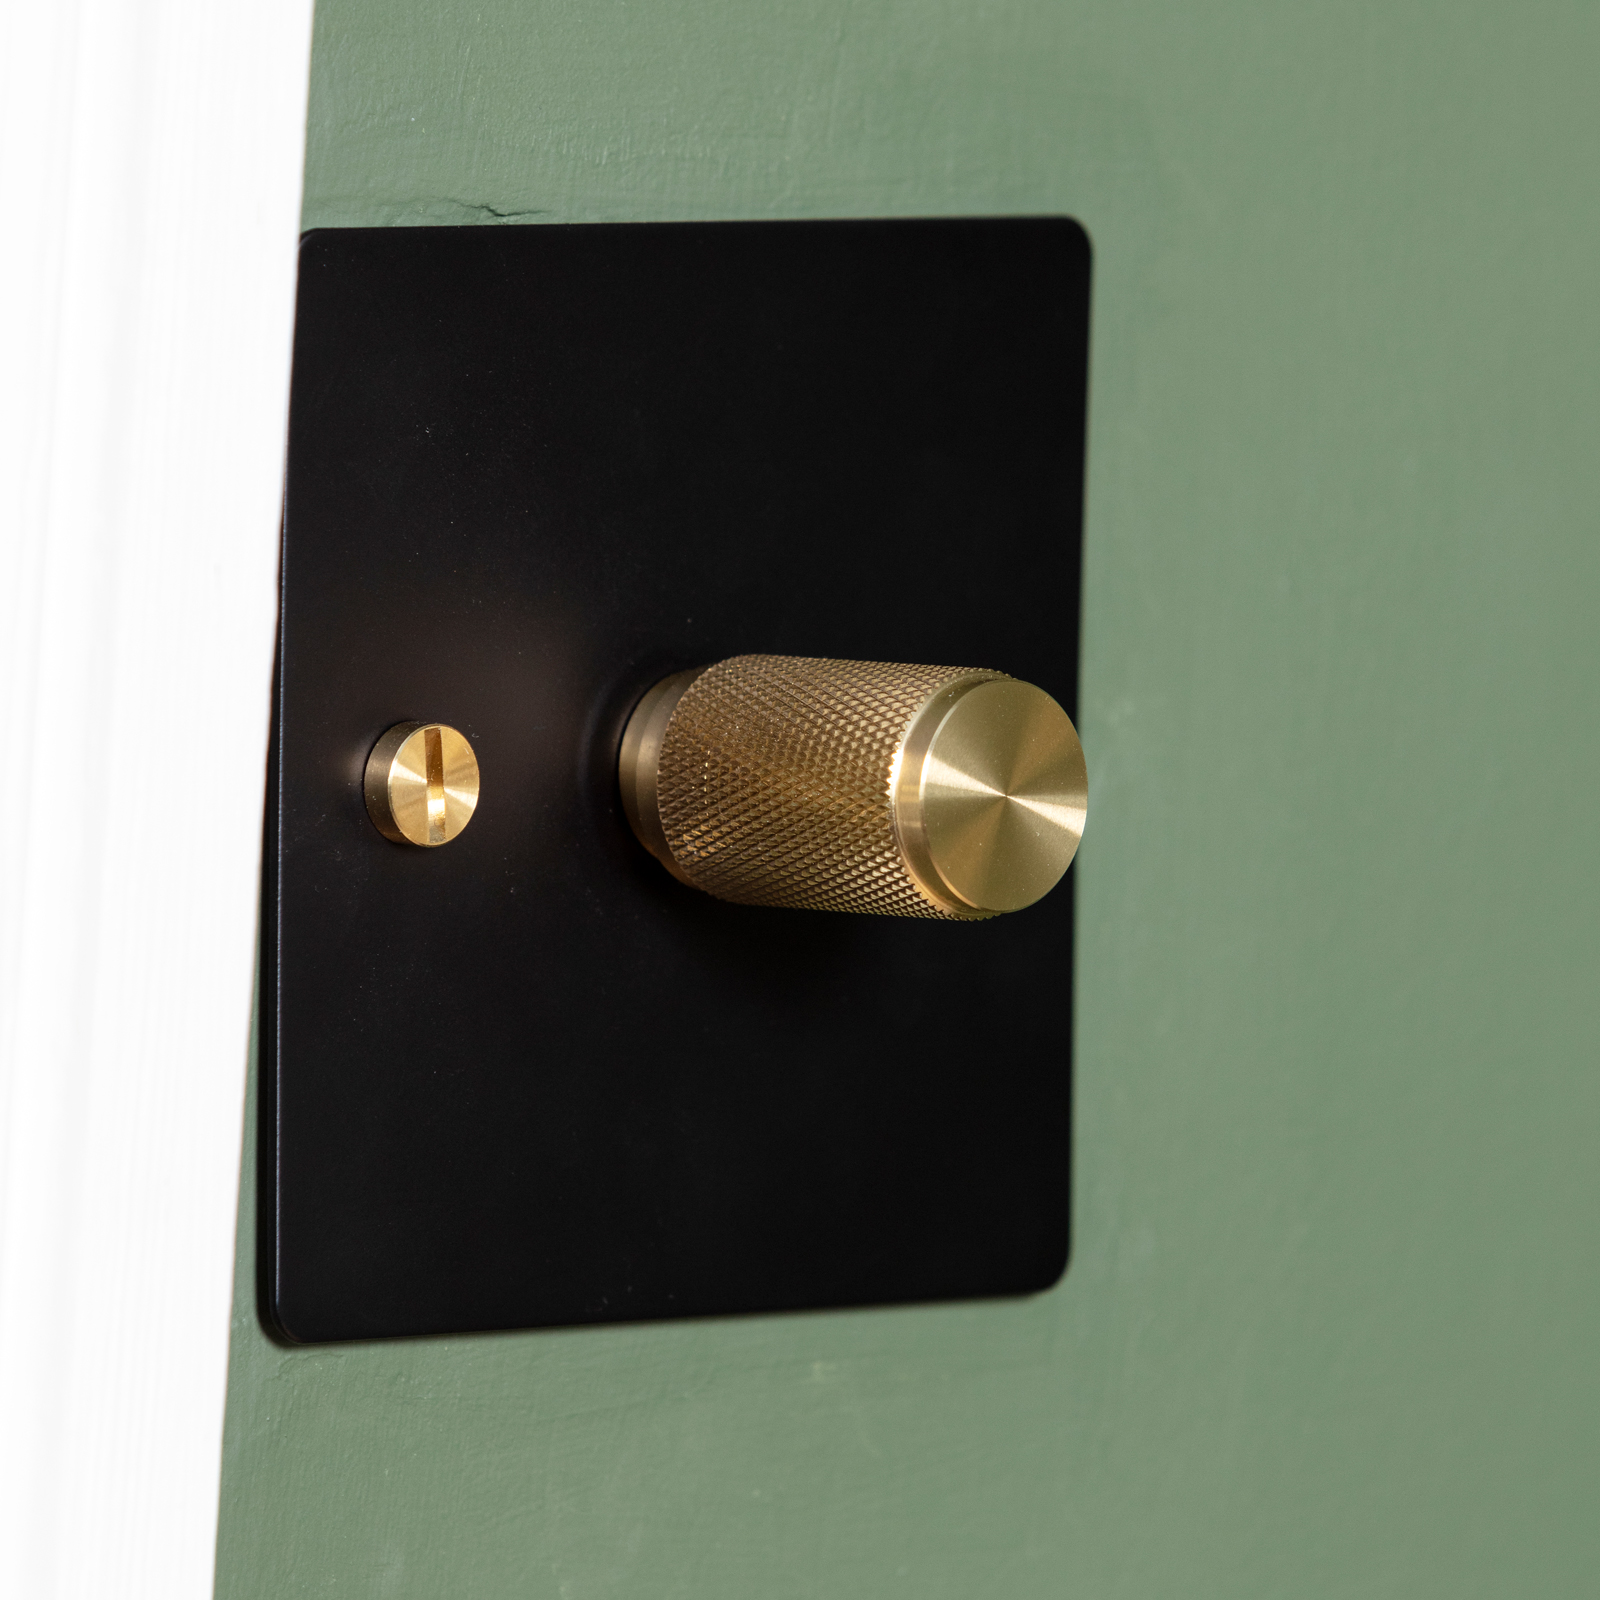 Buster + Punch brass and black dimmer switch